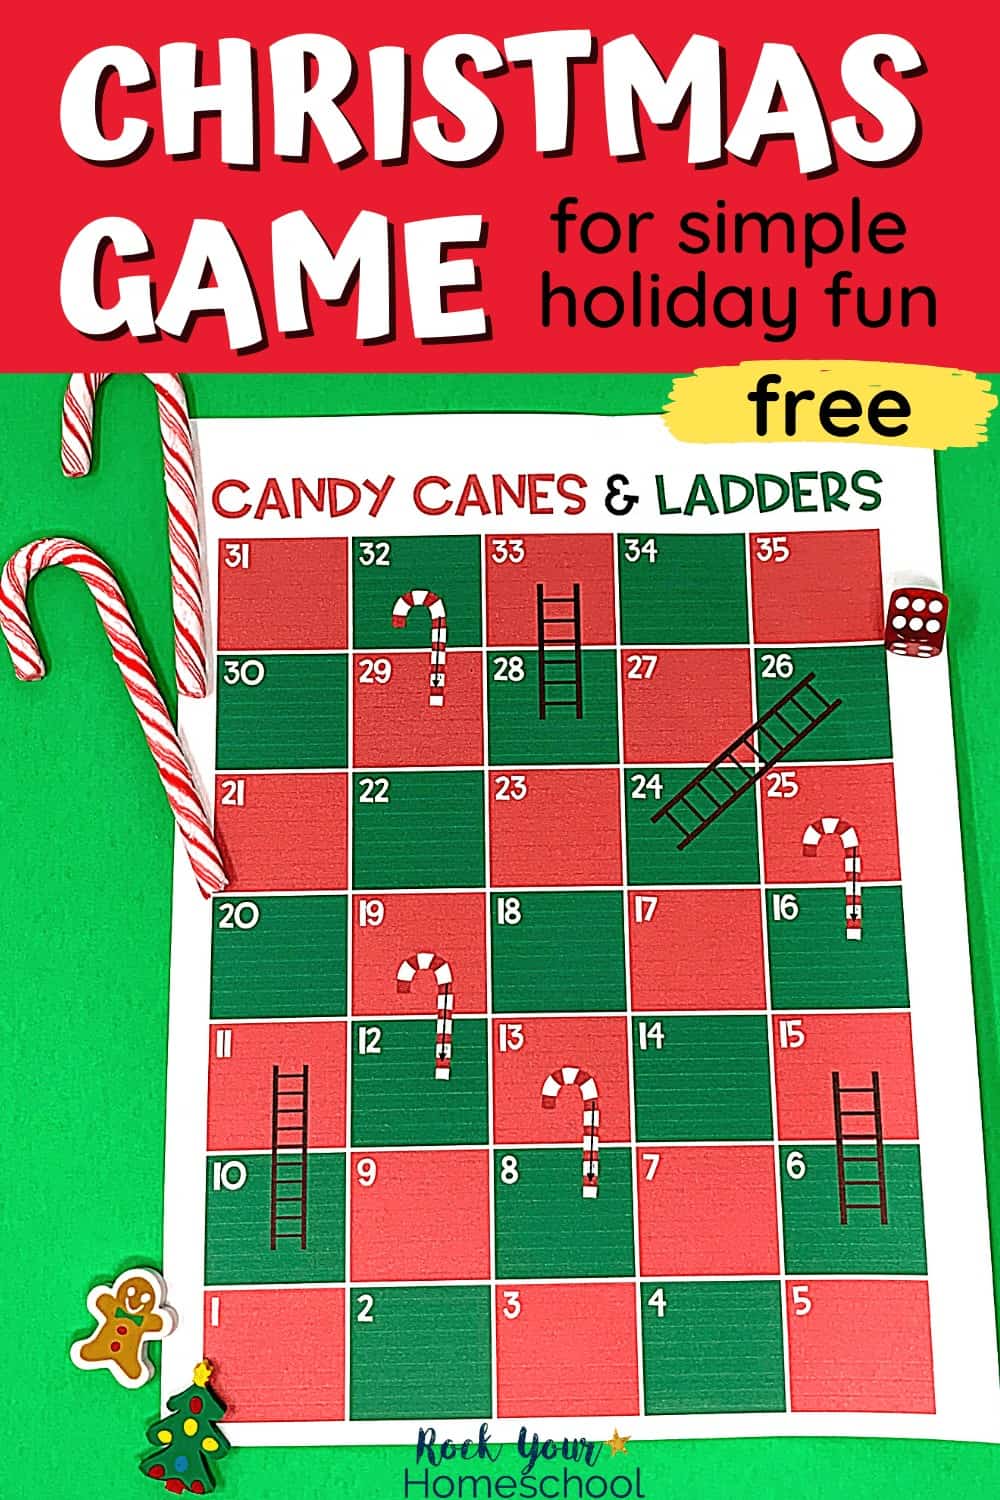 Free Christmas Game for Kids to Have Simple Holiday Fun